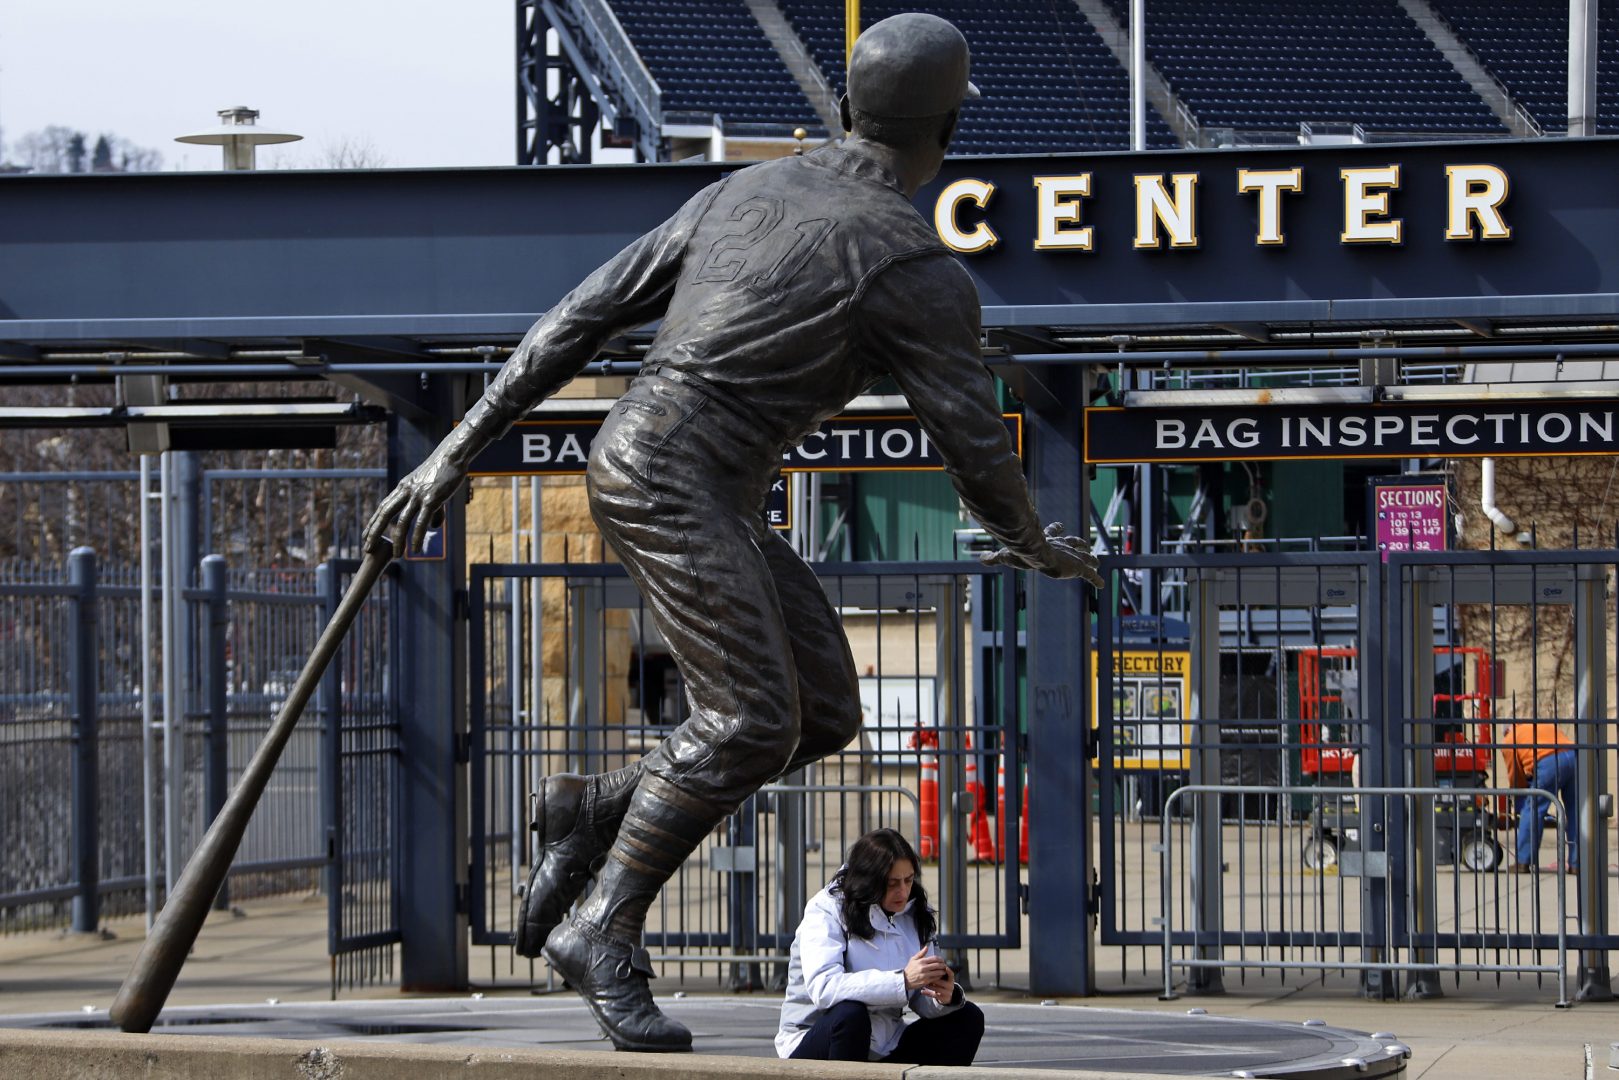 MLB's Pirates To Honor Roberto Clemente By Wearing His Number